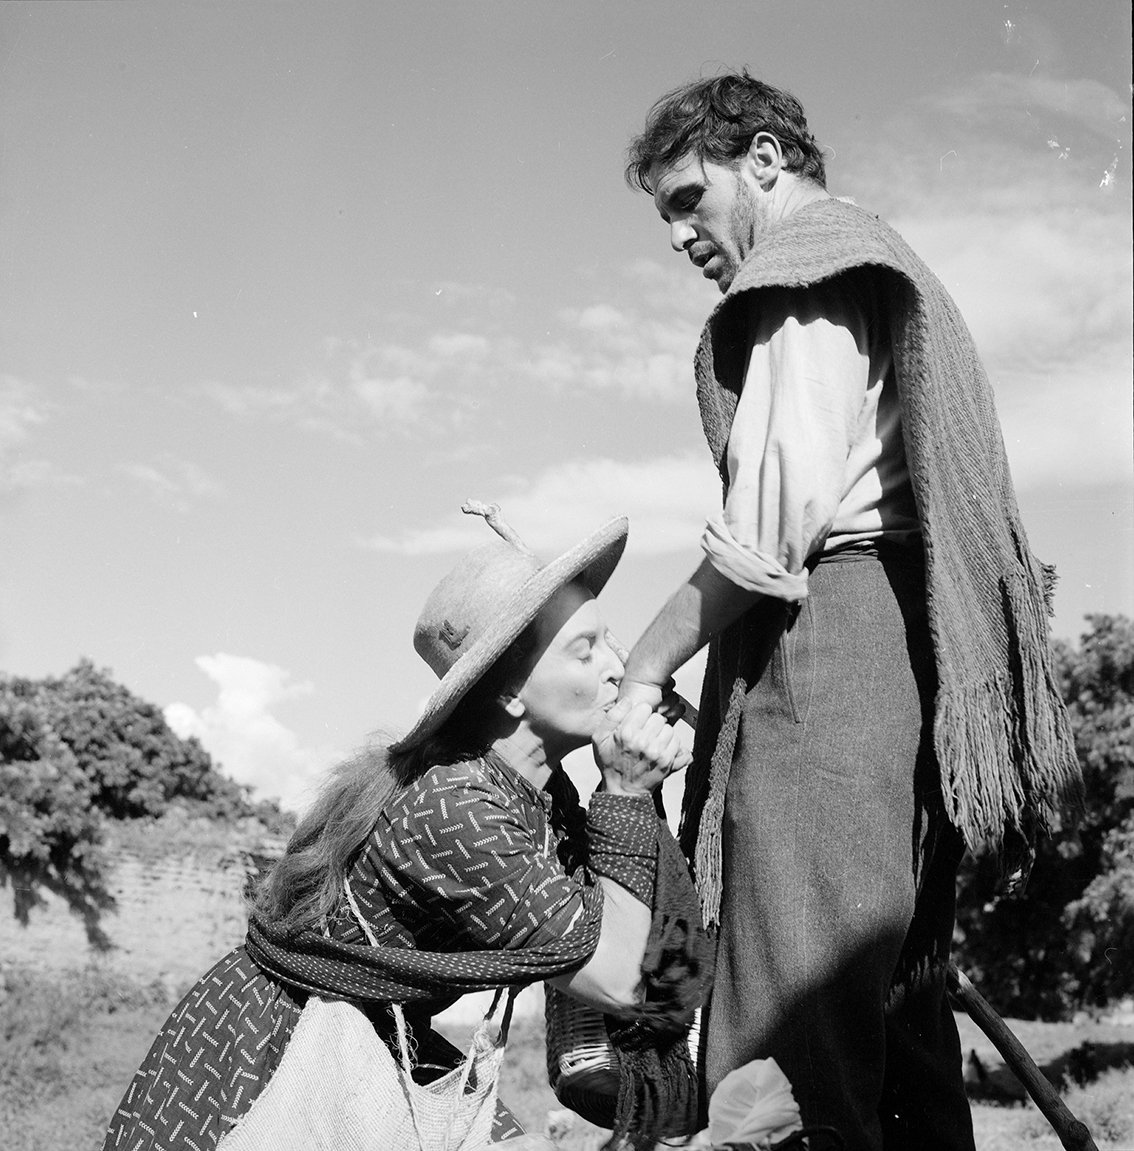 A still image from the 1959 film "Nazarin."